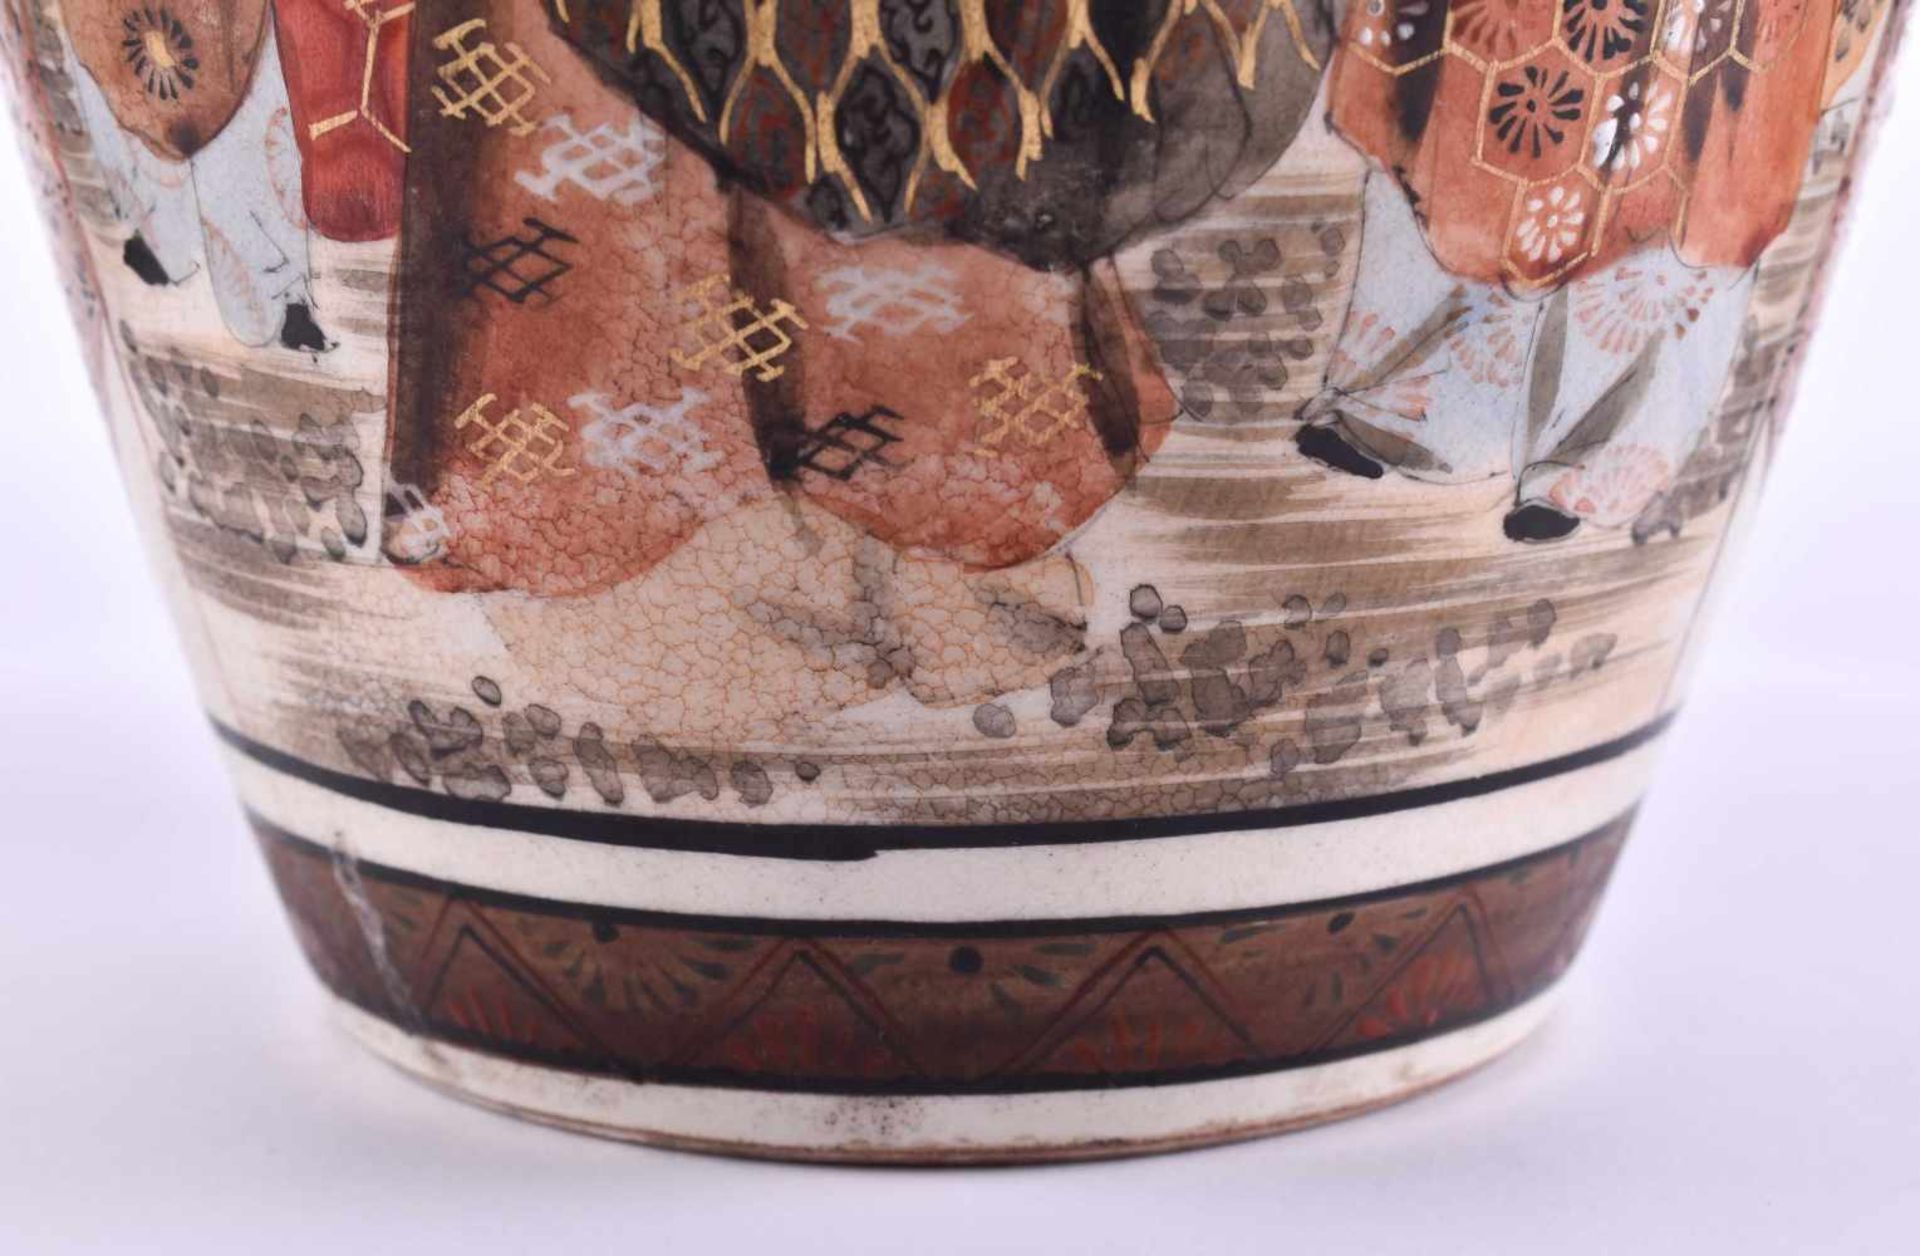 Satsuma vase Japan Meiji periodcolored and gold decorated, circumferentially painted with very - Image 5 of 6